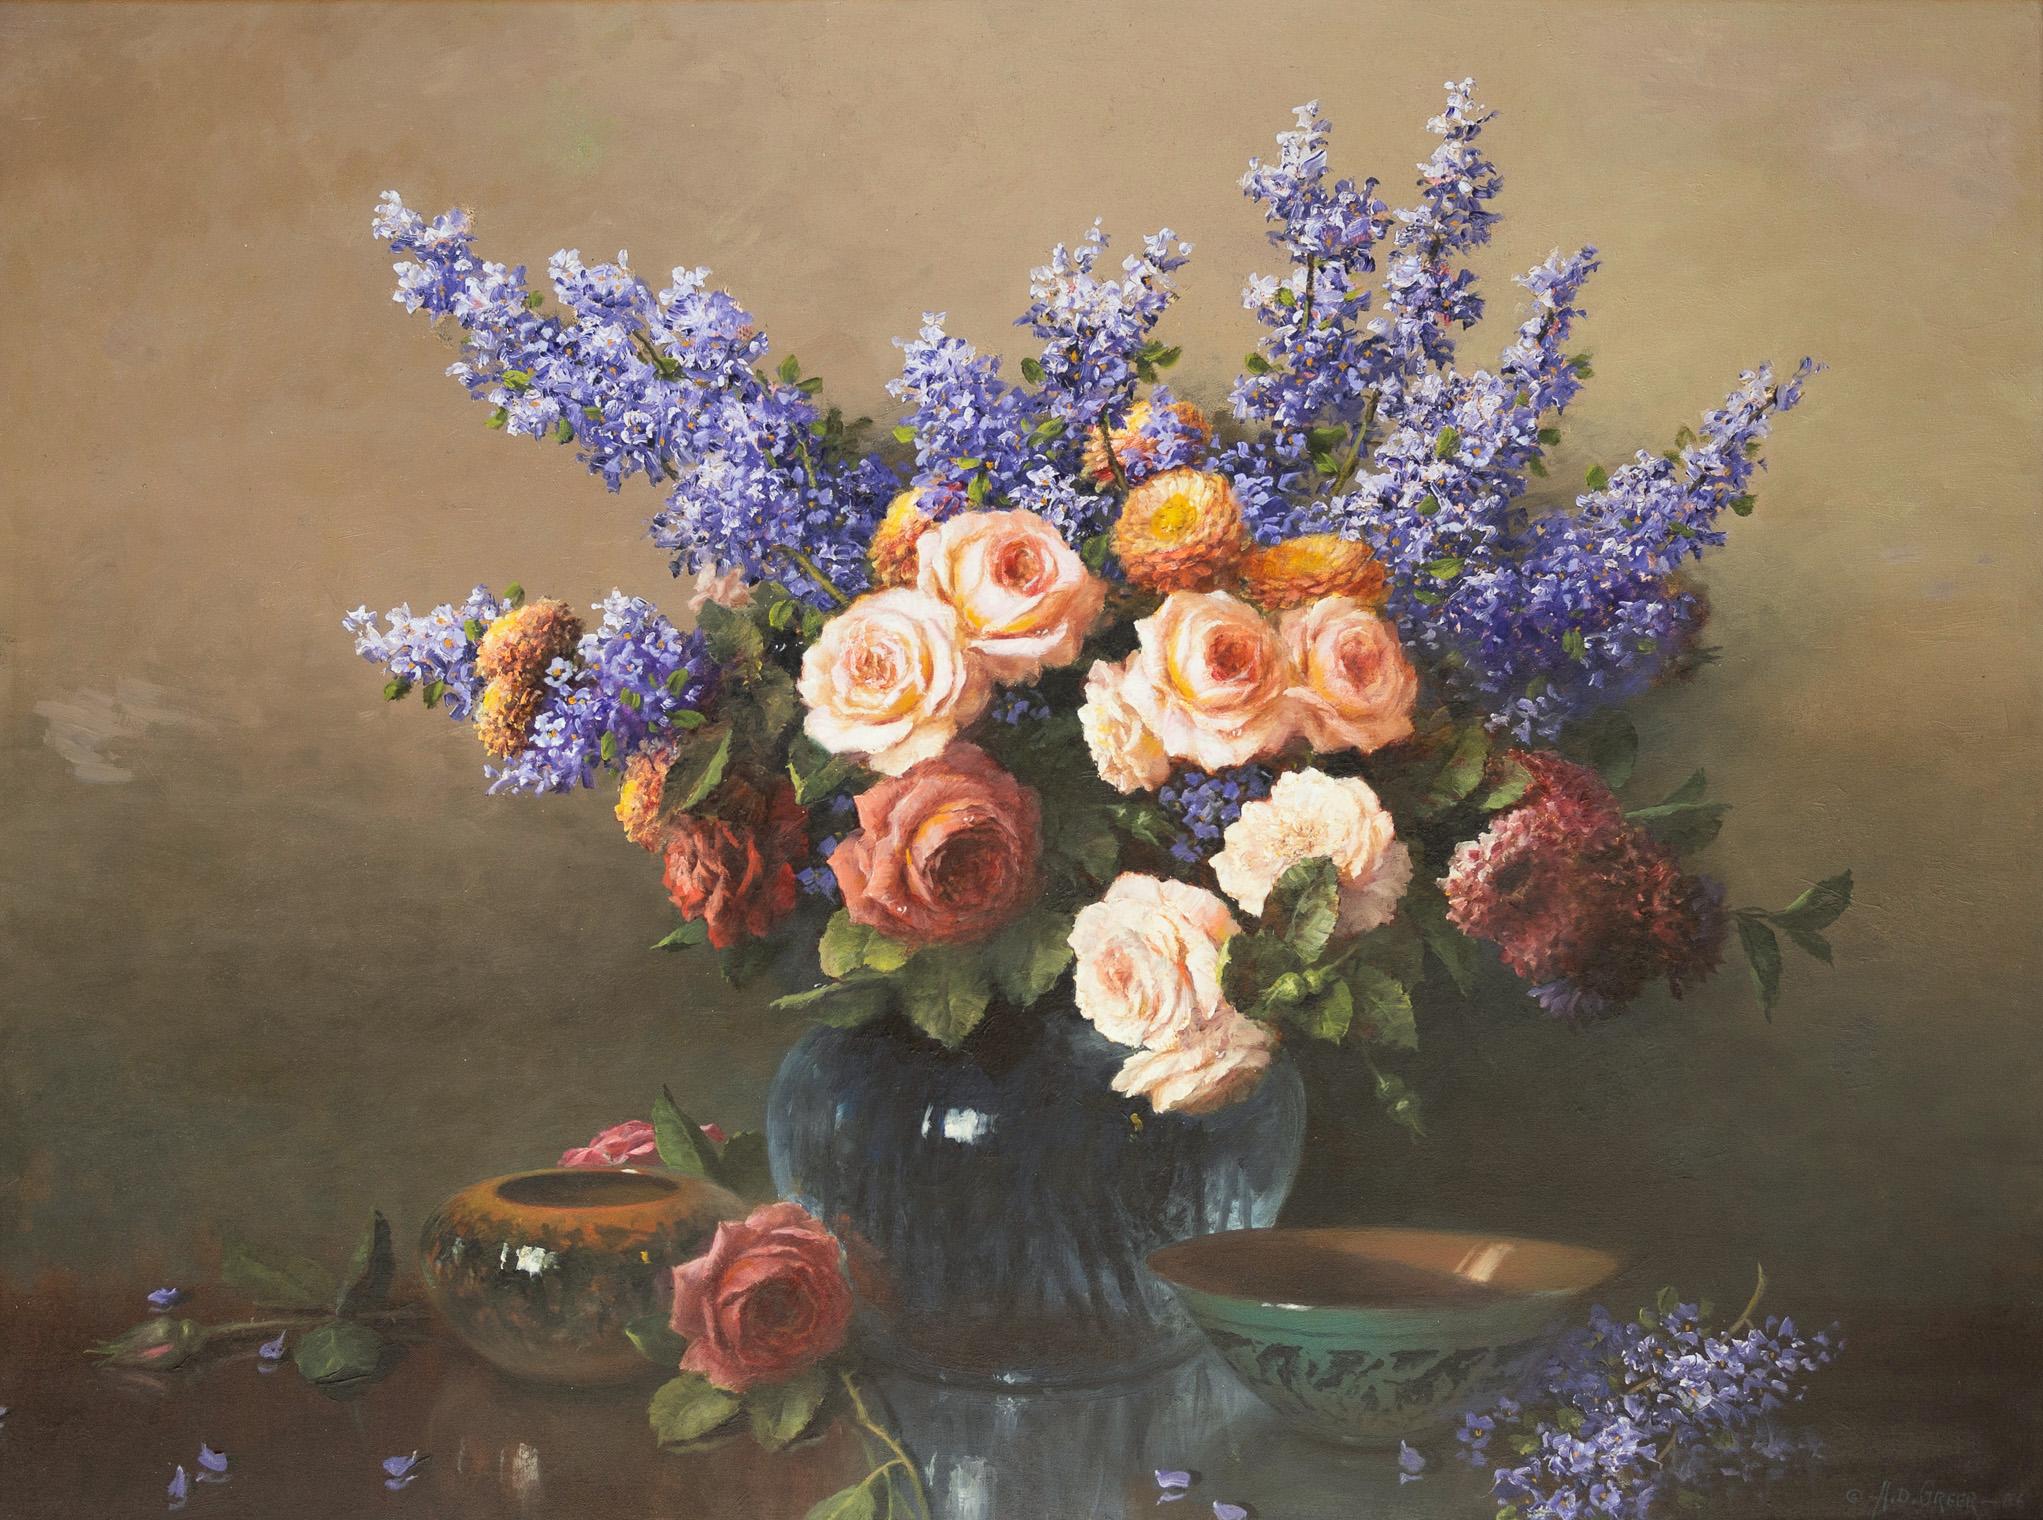 Floral Still Life with Roses, Lilacs, and Zinnias - Painting by A.D. Greer